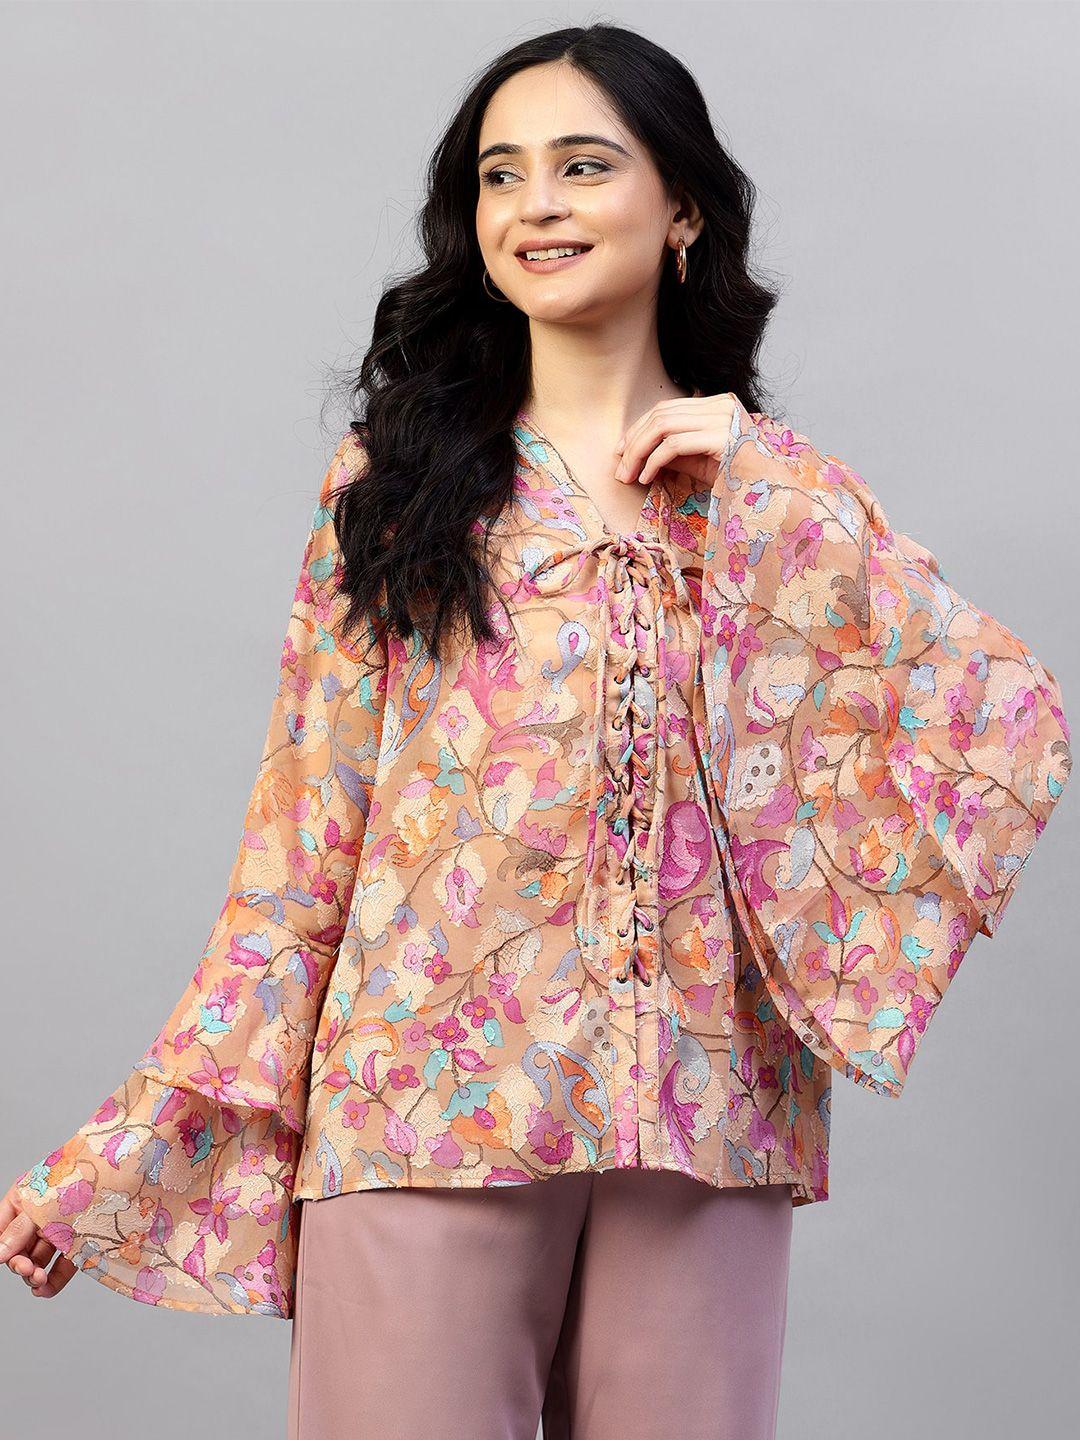 hencemade floral printed tie-up neck bell sleeves georgette shirt style top